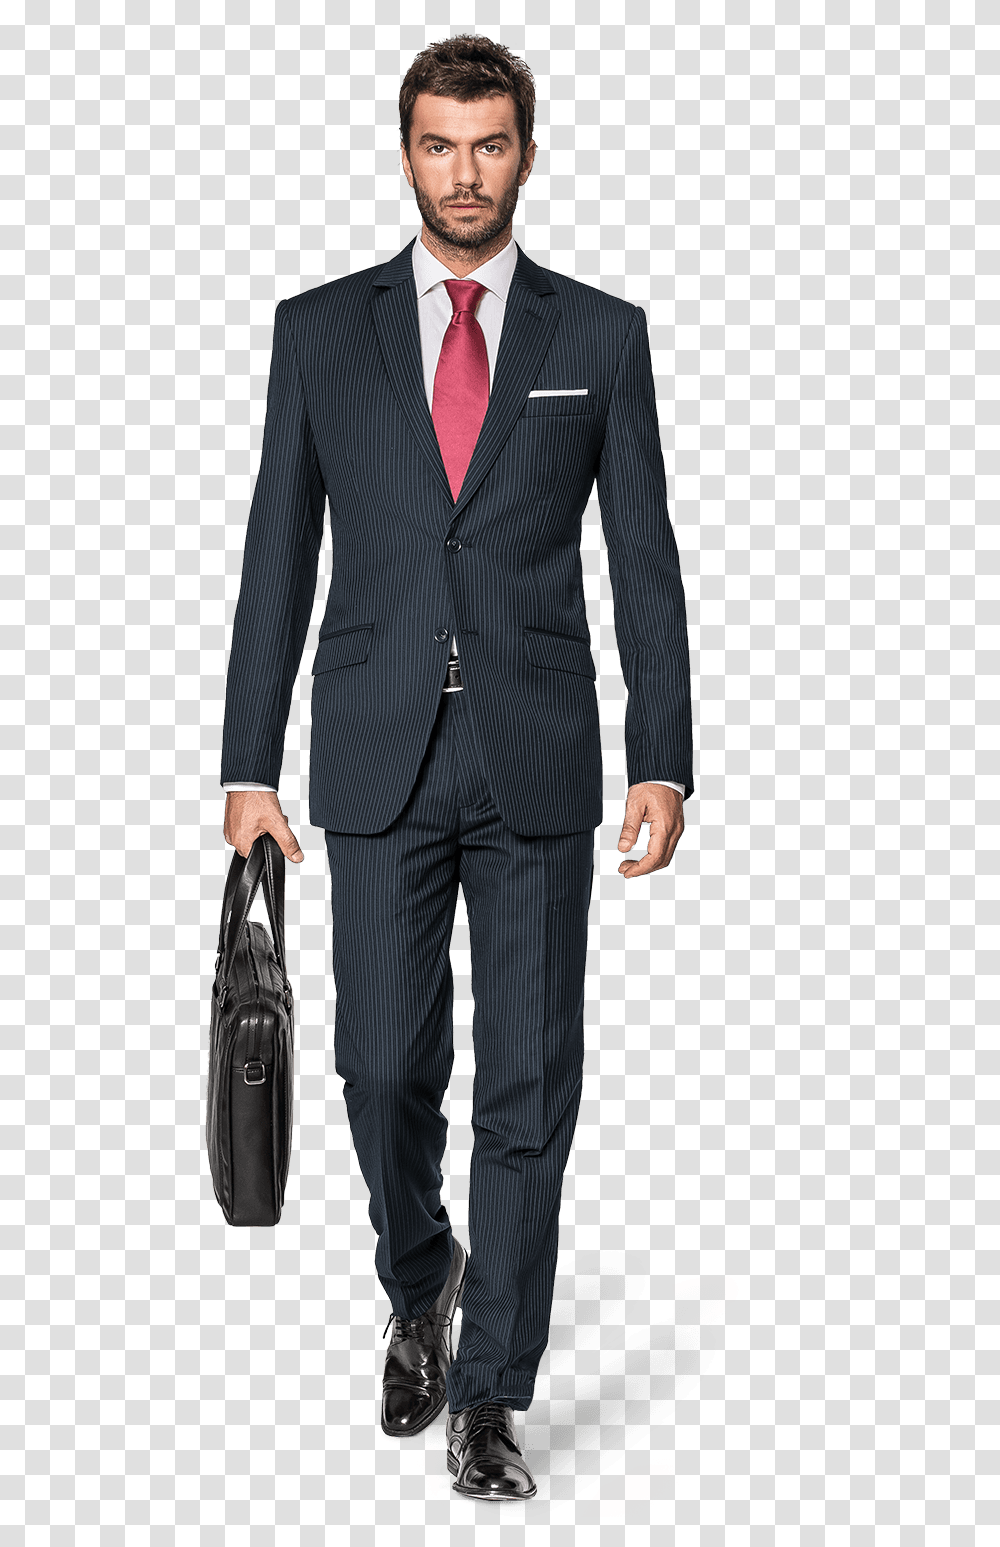 Business Suit Matching Dad And Son Suits, Overcoat, Tie, Accessories Transparent Png